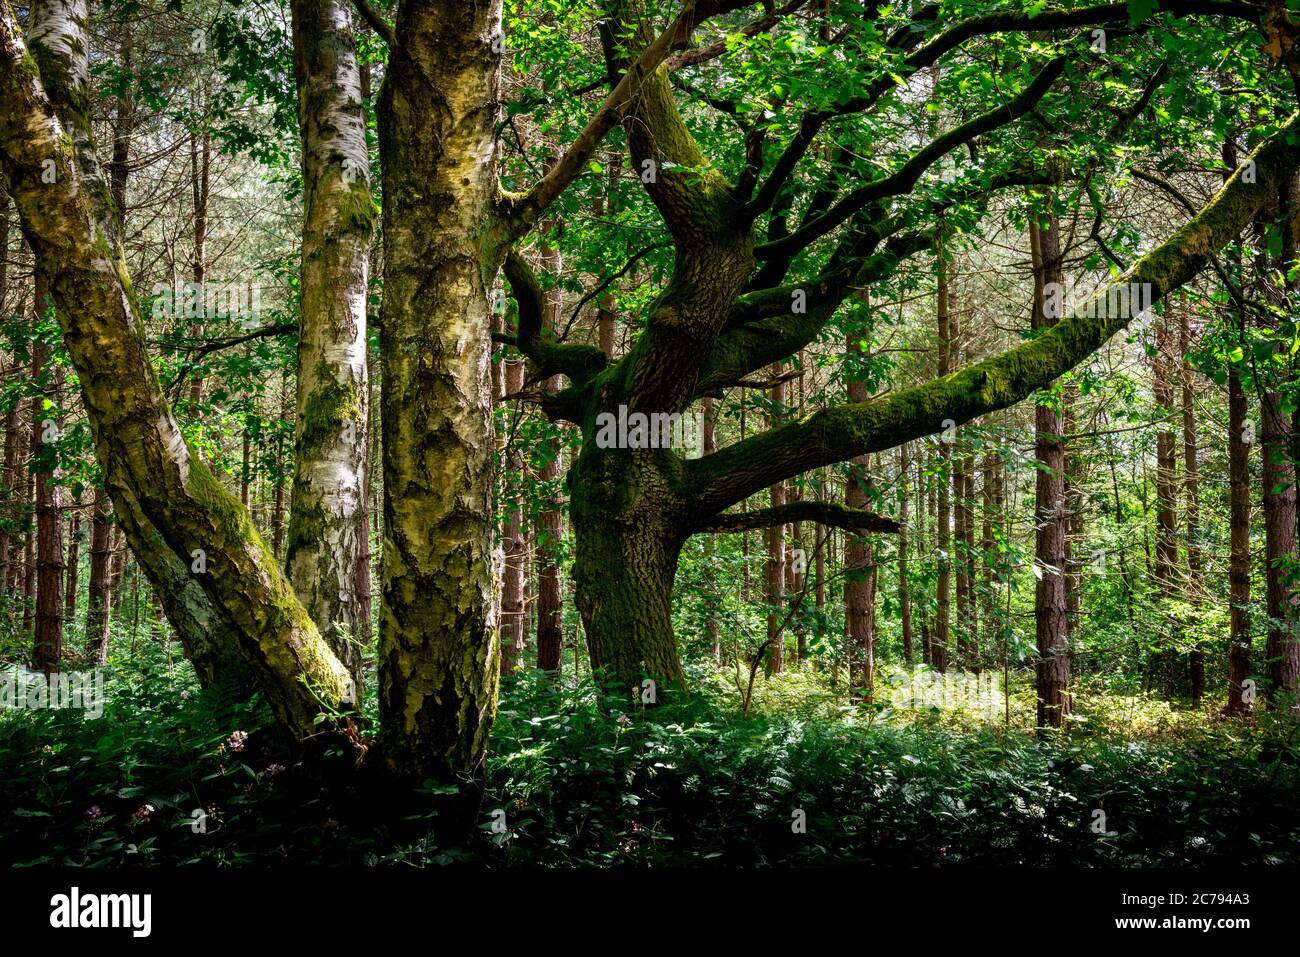 Old growth forest,Blidworth woods,Nottinghamshire,England,UK Stock Photo